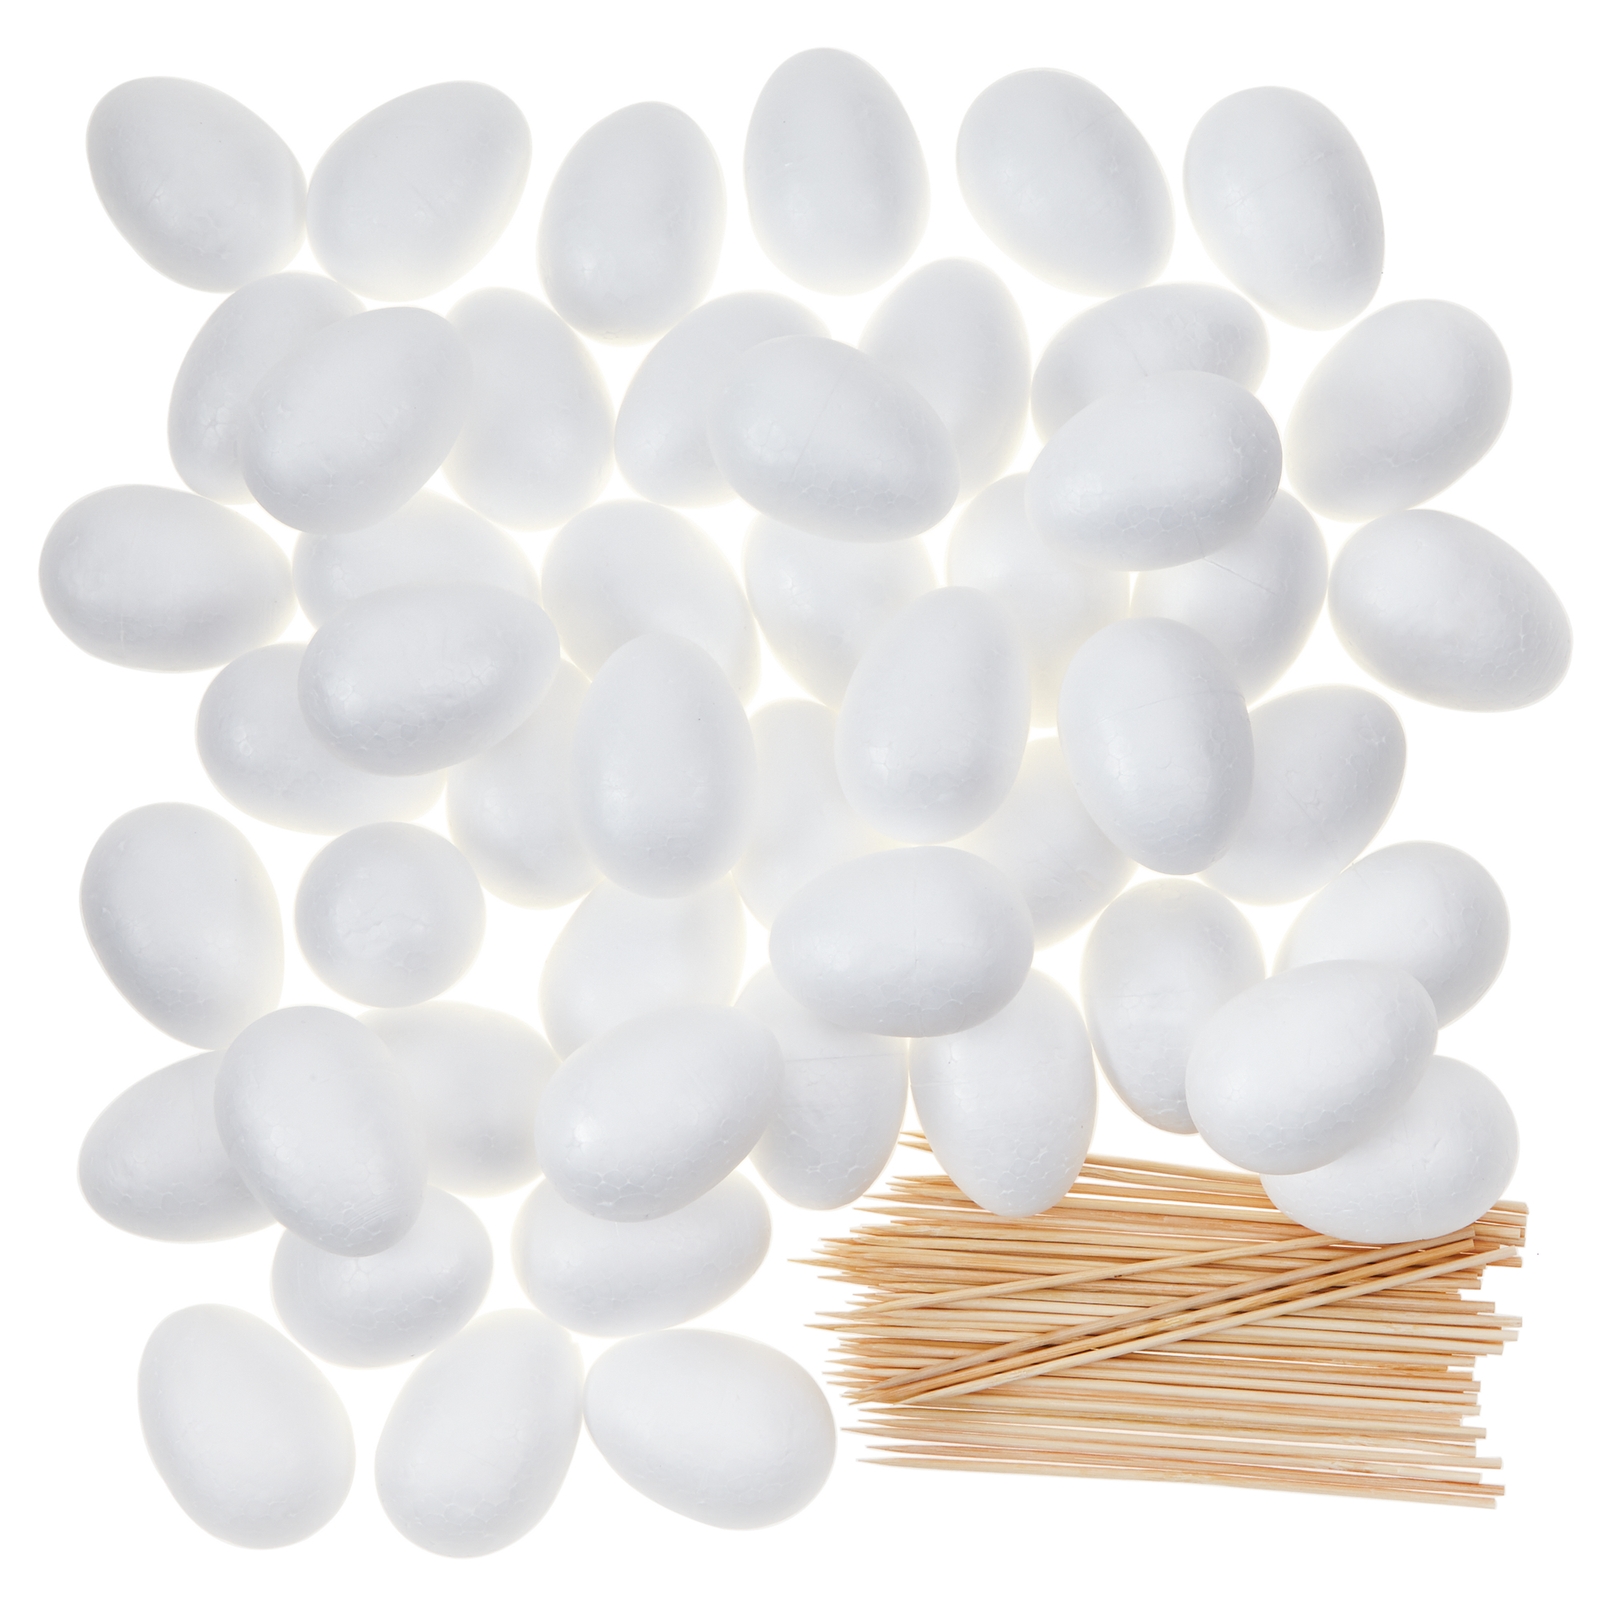 Eggs with Sticks Pack of 100